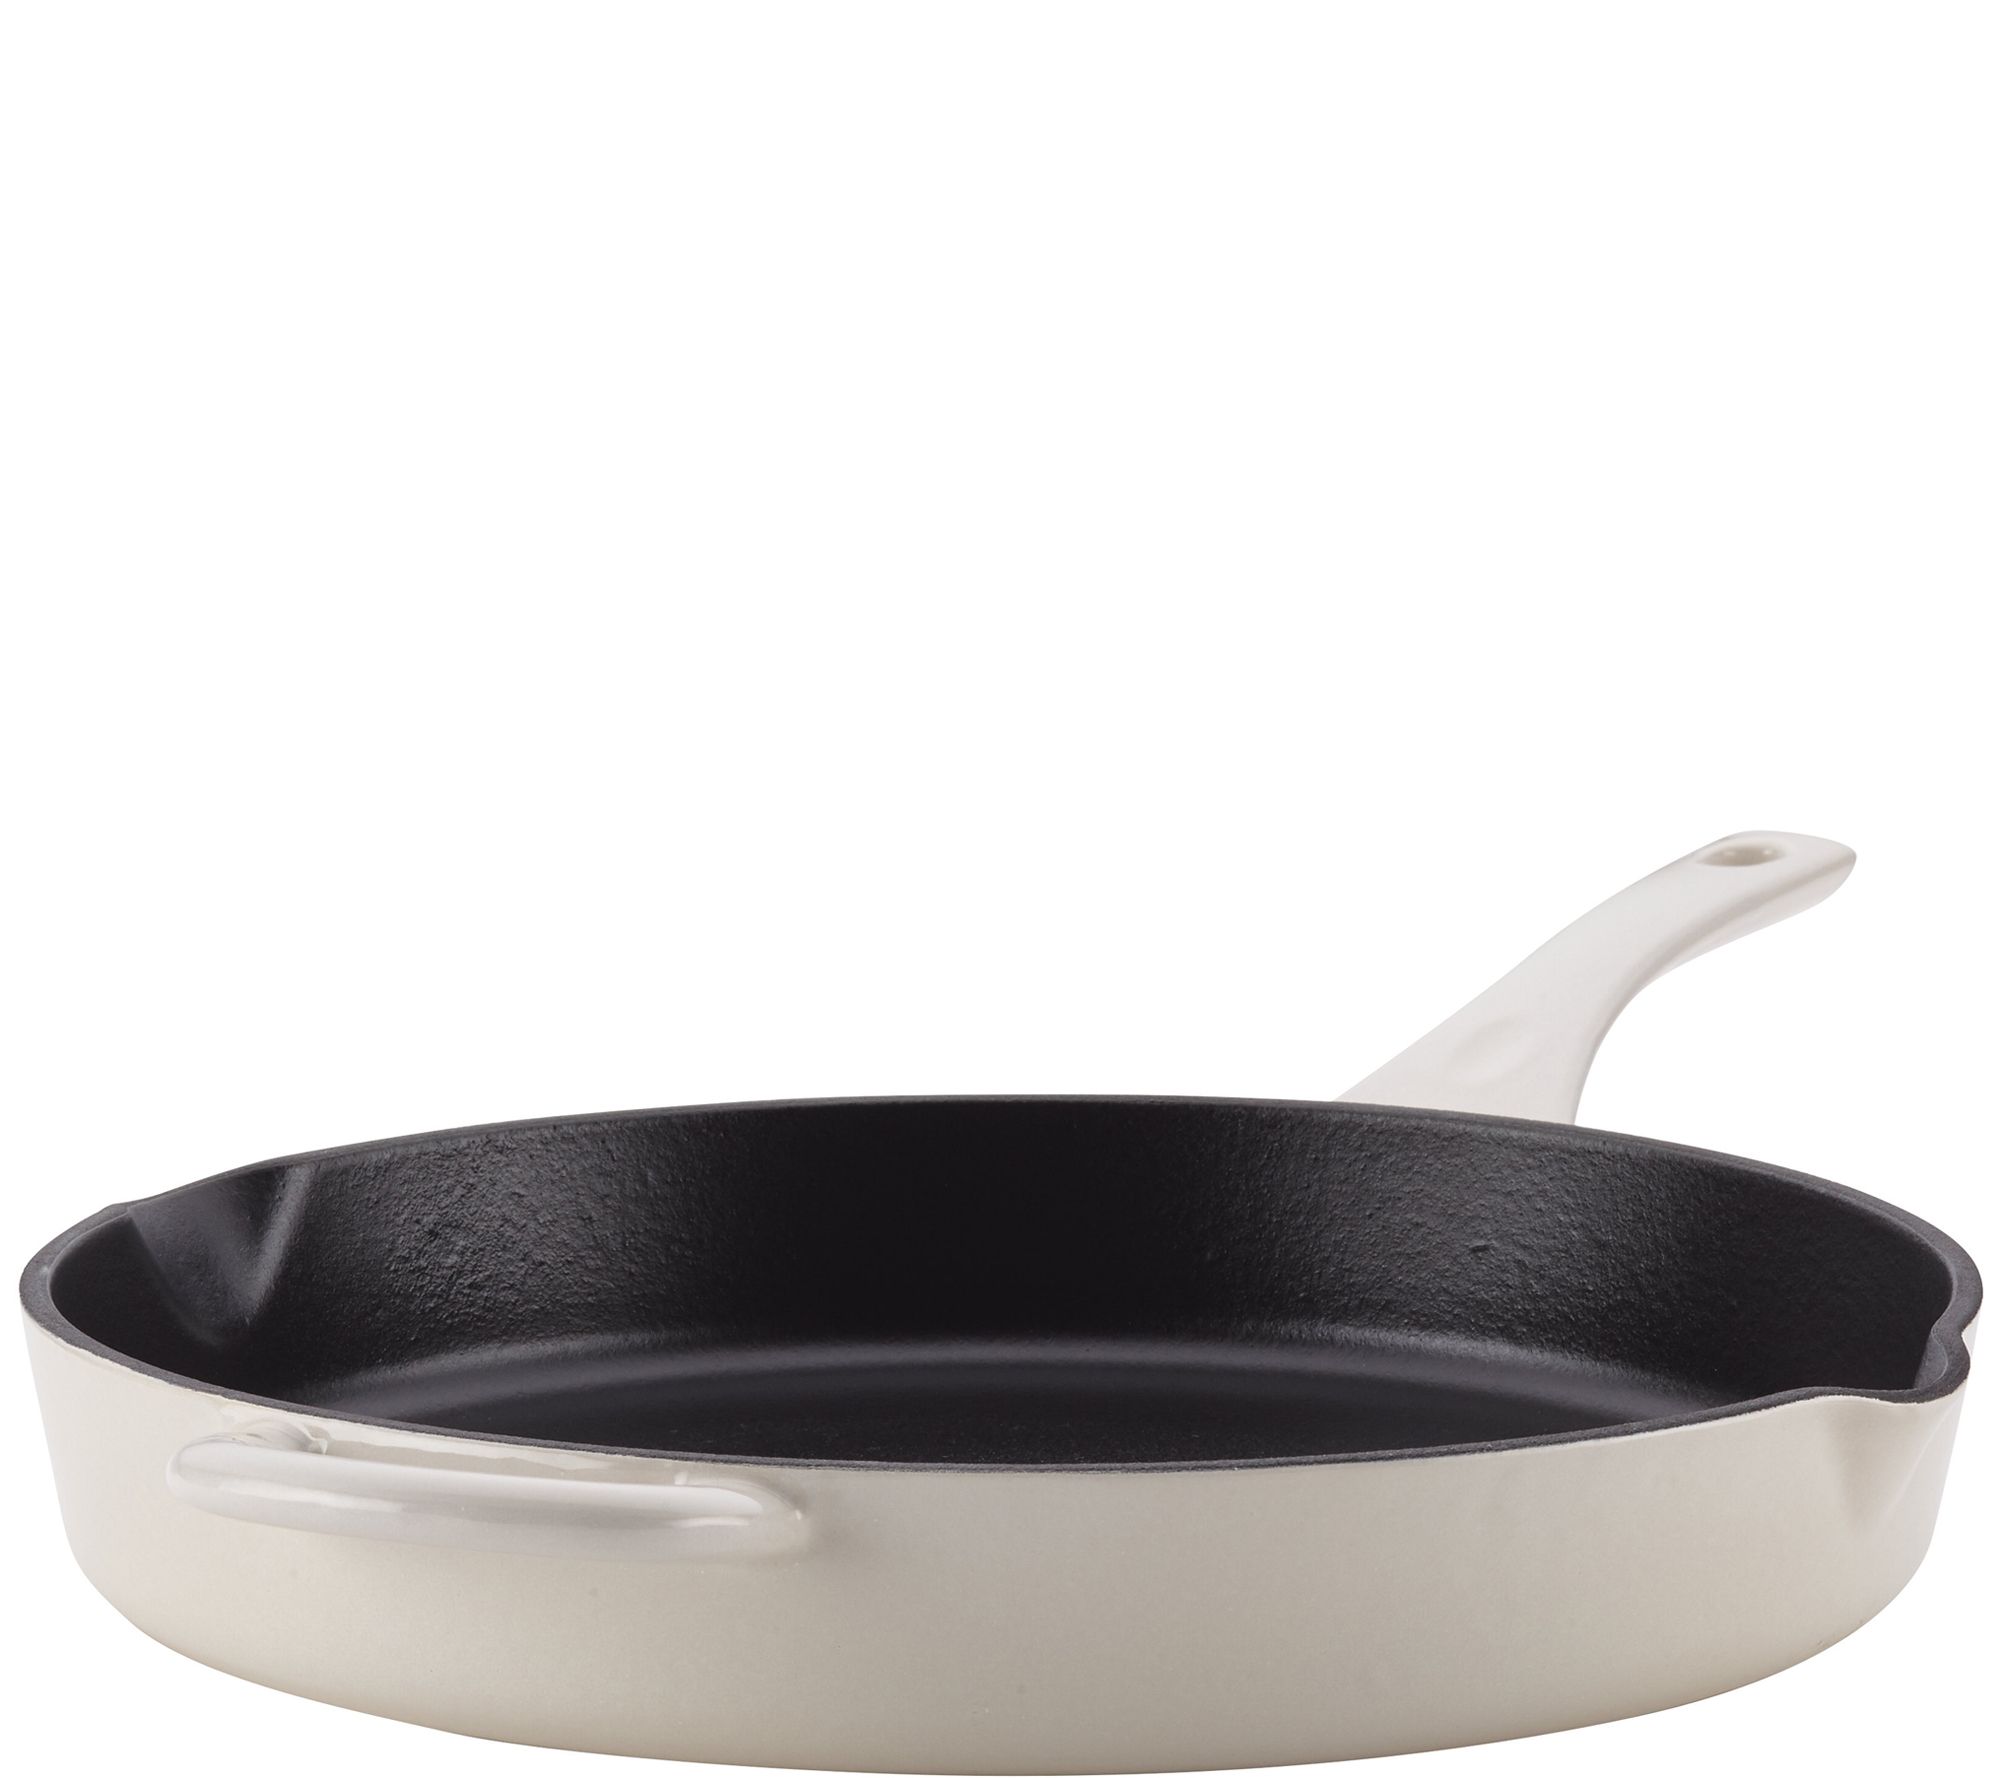 Ayesha Curry Enameled Cast Iron Dutch Oven Cookware Review - Consumer  Reports